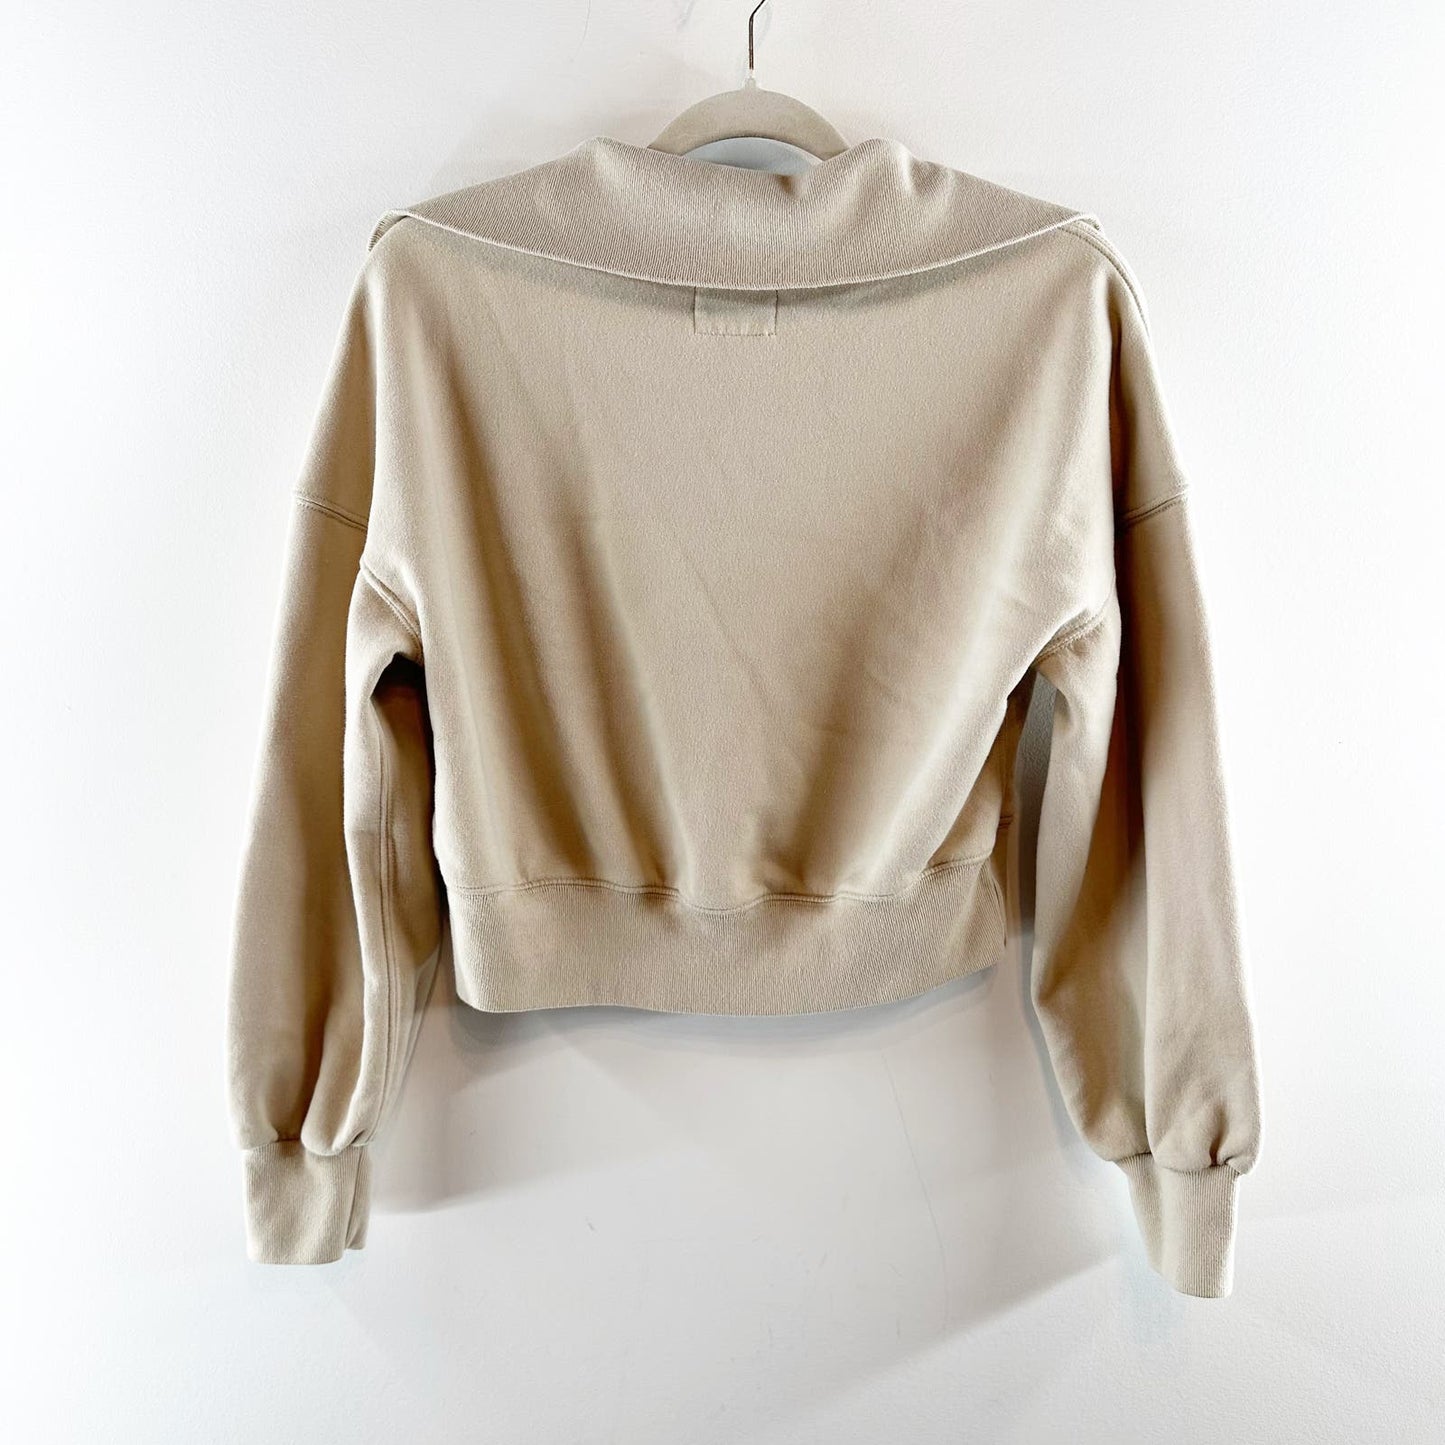 Abercrombie & Fitch Soft AF V Neck Polo Cropped Collared Sweatshirt Tan Small